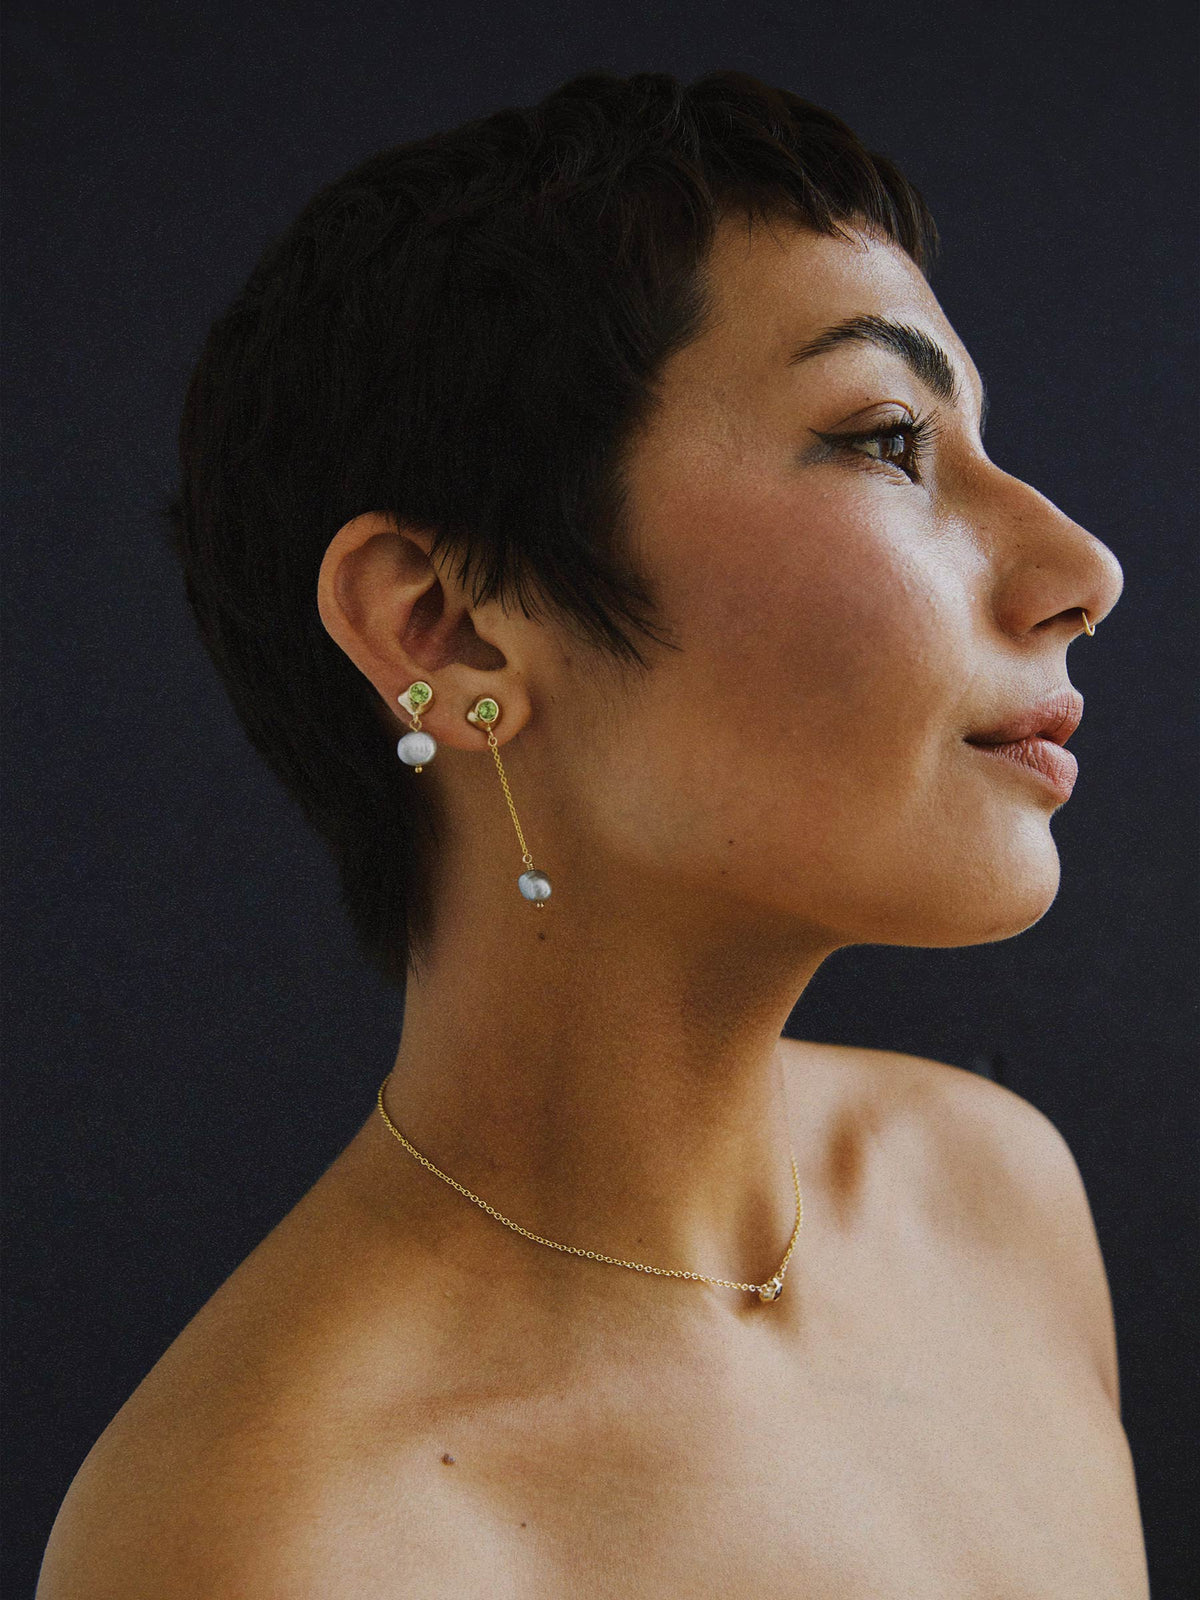 FARIS KIRA Drops in 14k gold-plated bronze with peridot, both sides of the pair styled on models right ear. Long side worn on standard lobe piercing, short side of pair worn on upper lobe ear piercing. Styled with KIRA Necklace in 14k gold with garnet